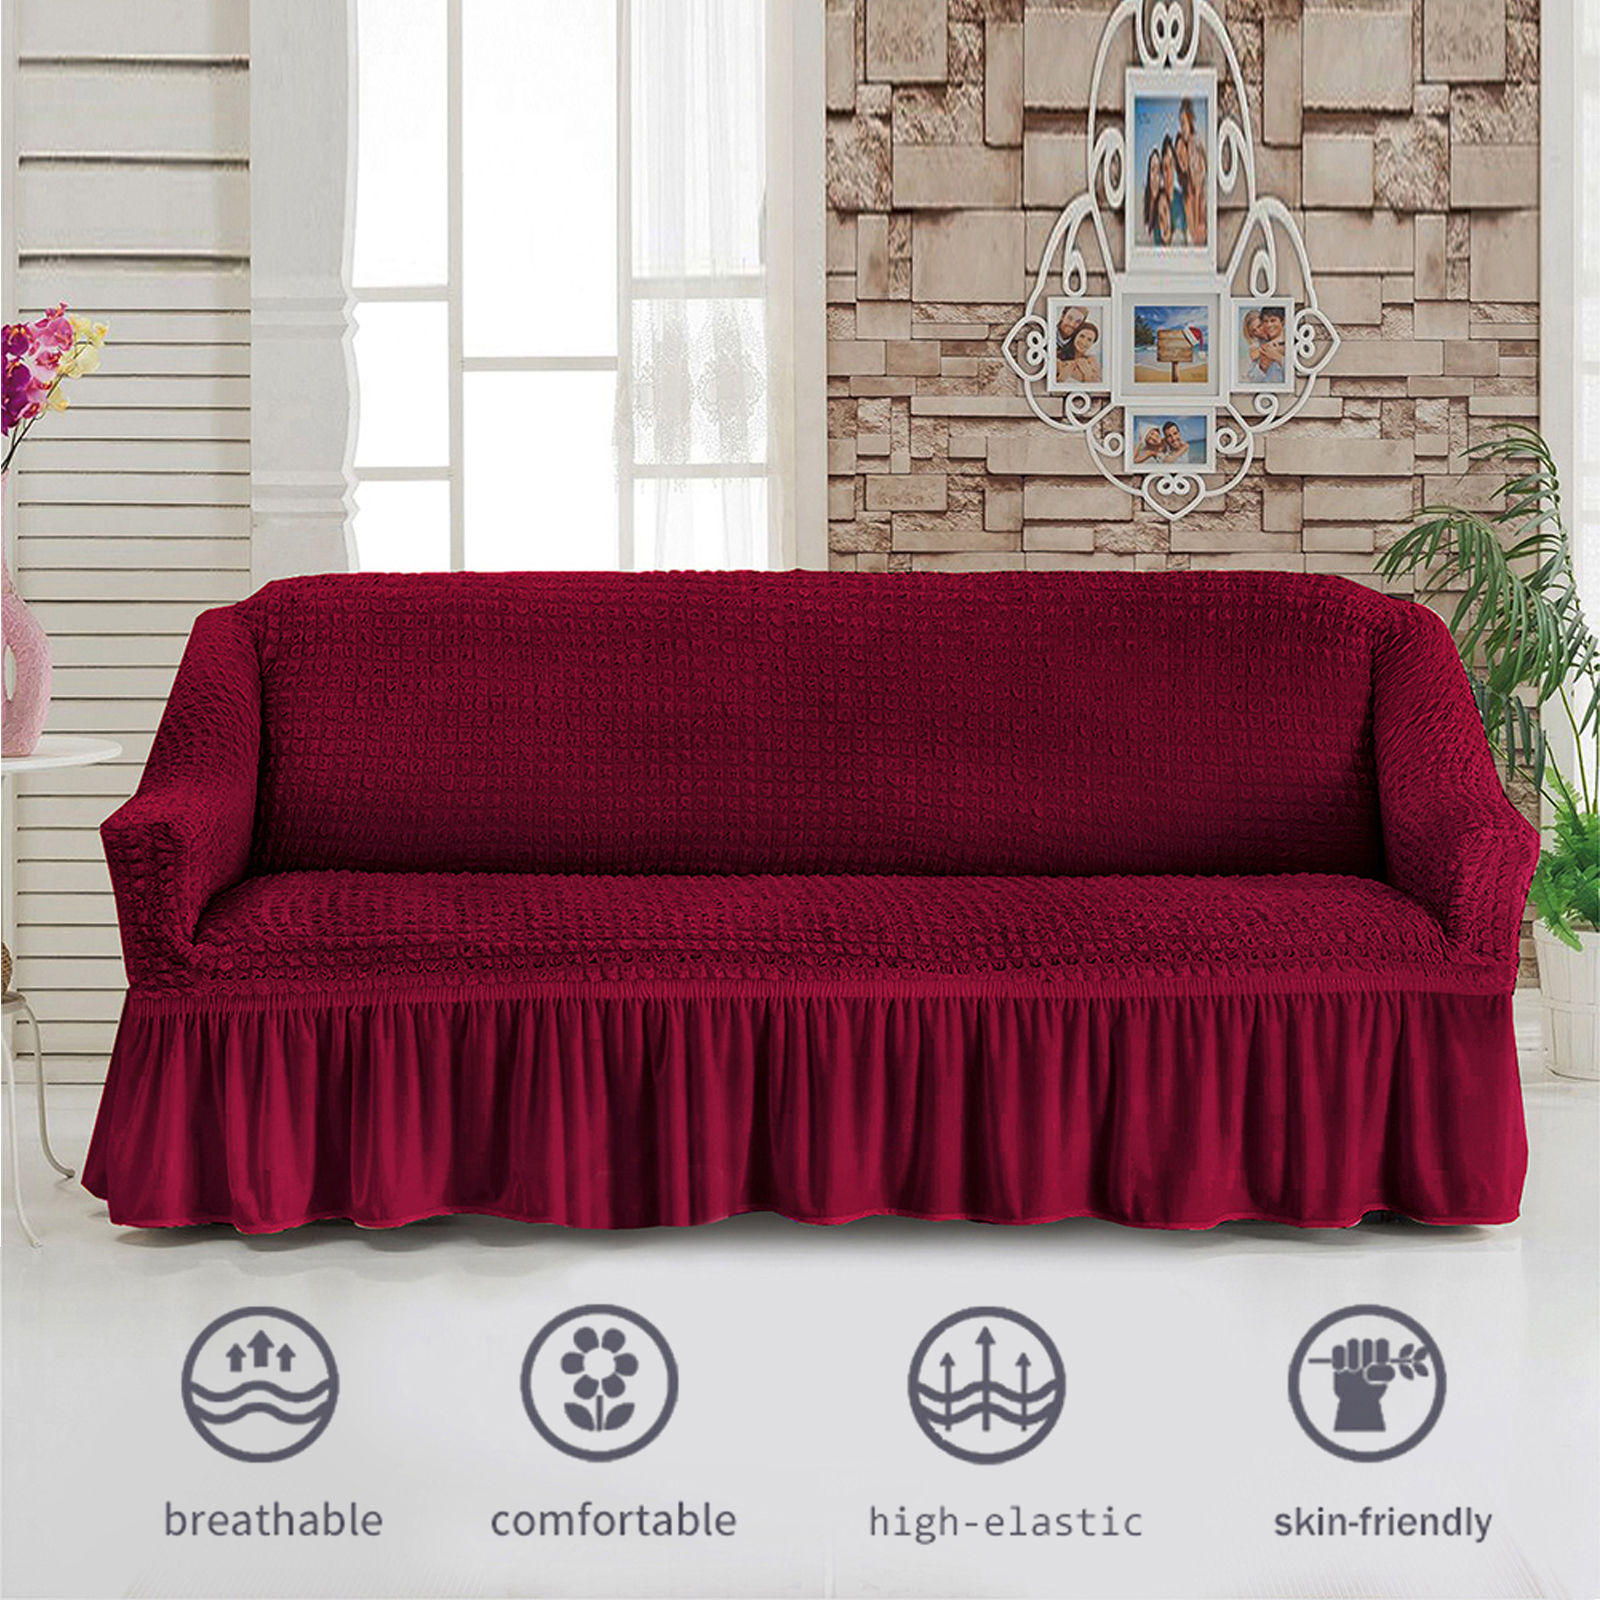 Stretch Sofa Slipcover, 3 Seater Sofa Slipcovers With Skirt With Armless Soft Sofa Cover Elastic Straps Sofa Slipcover For Living Room Kids Pets-red-X-Large